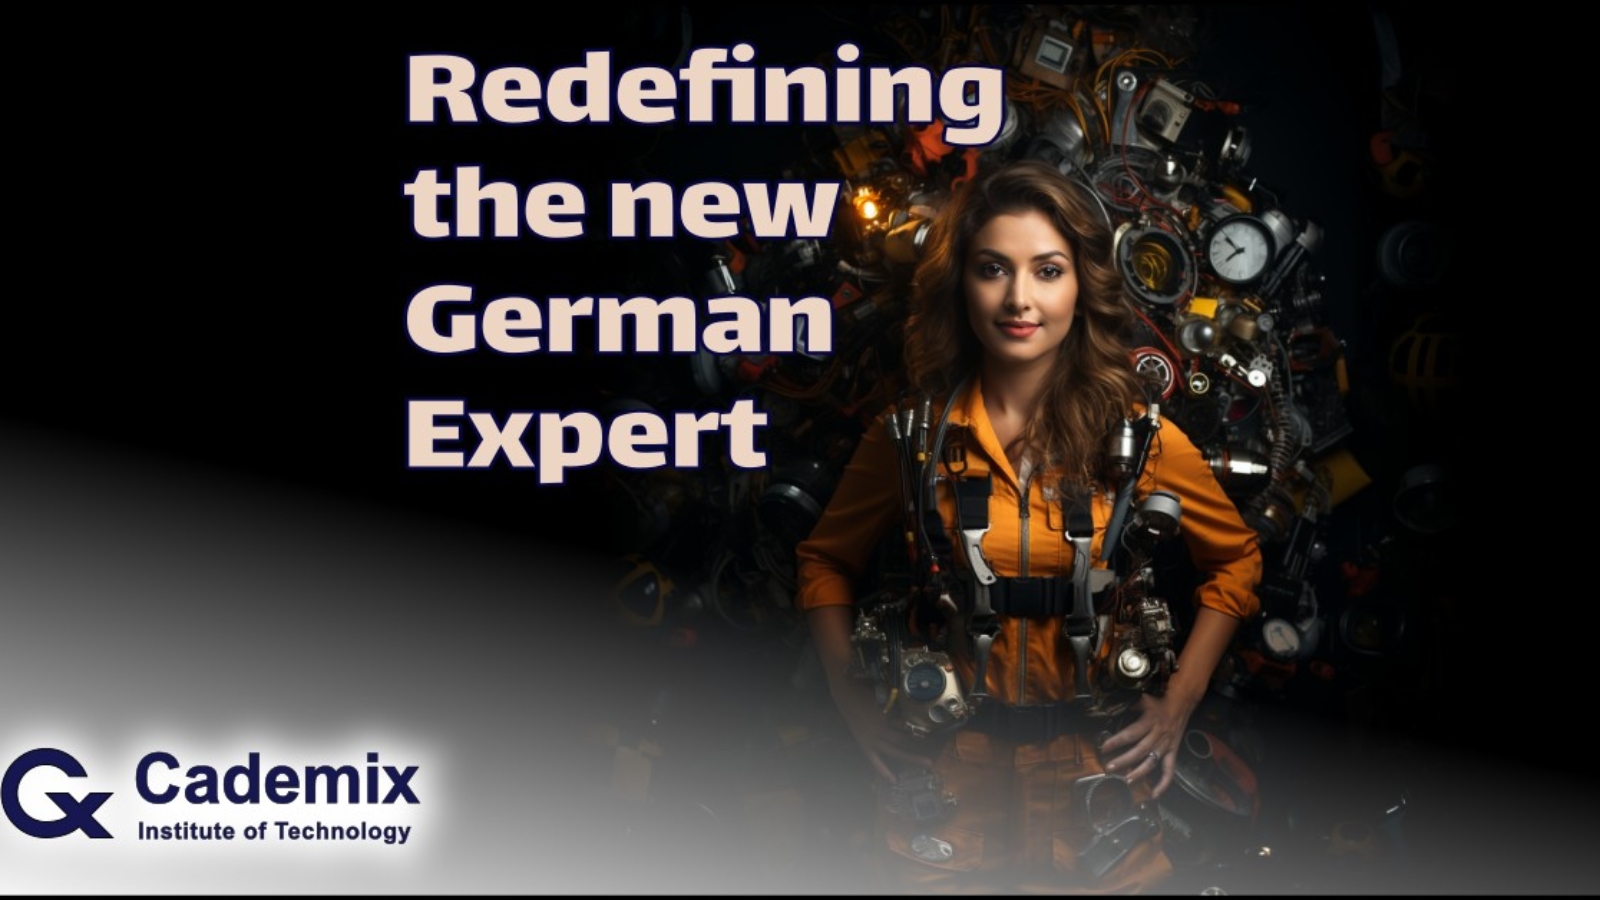 Redefining the New German Expert: From Lifelong Specialization to Cross-Functional Skills